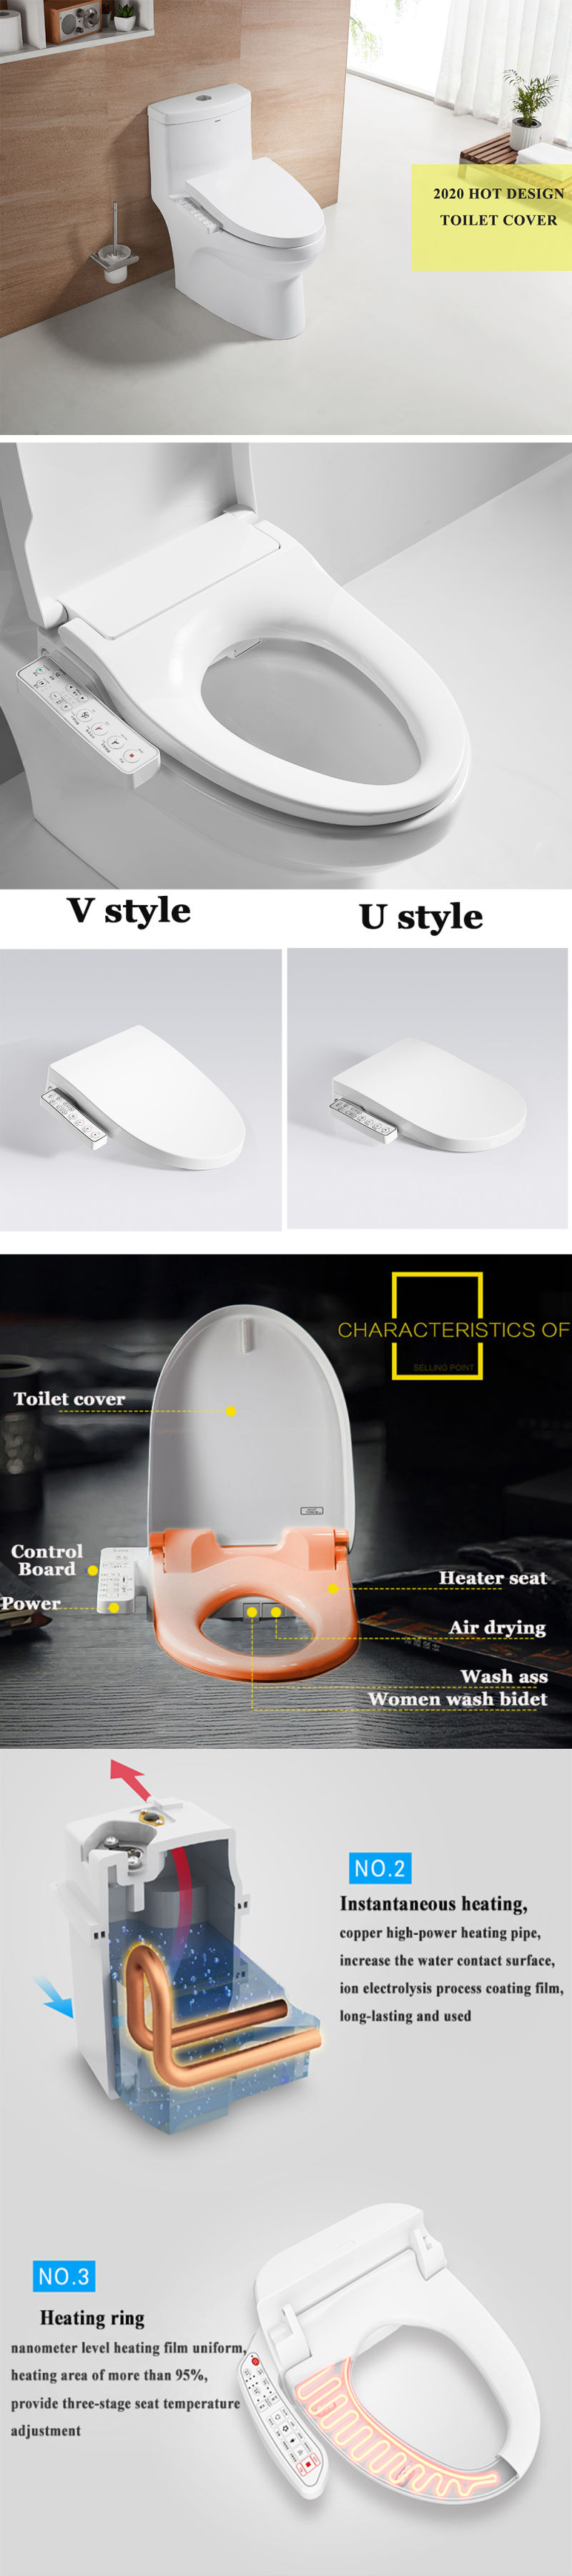 Wc Sanitary Toilet Bowl Intelligent Cover Smart PP Cover Seat